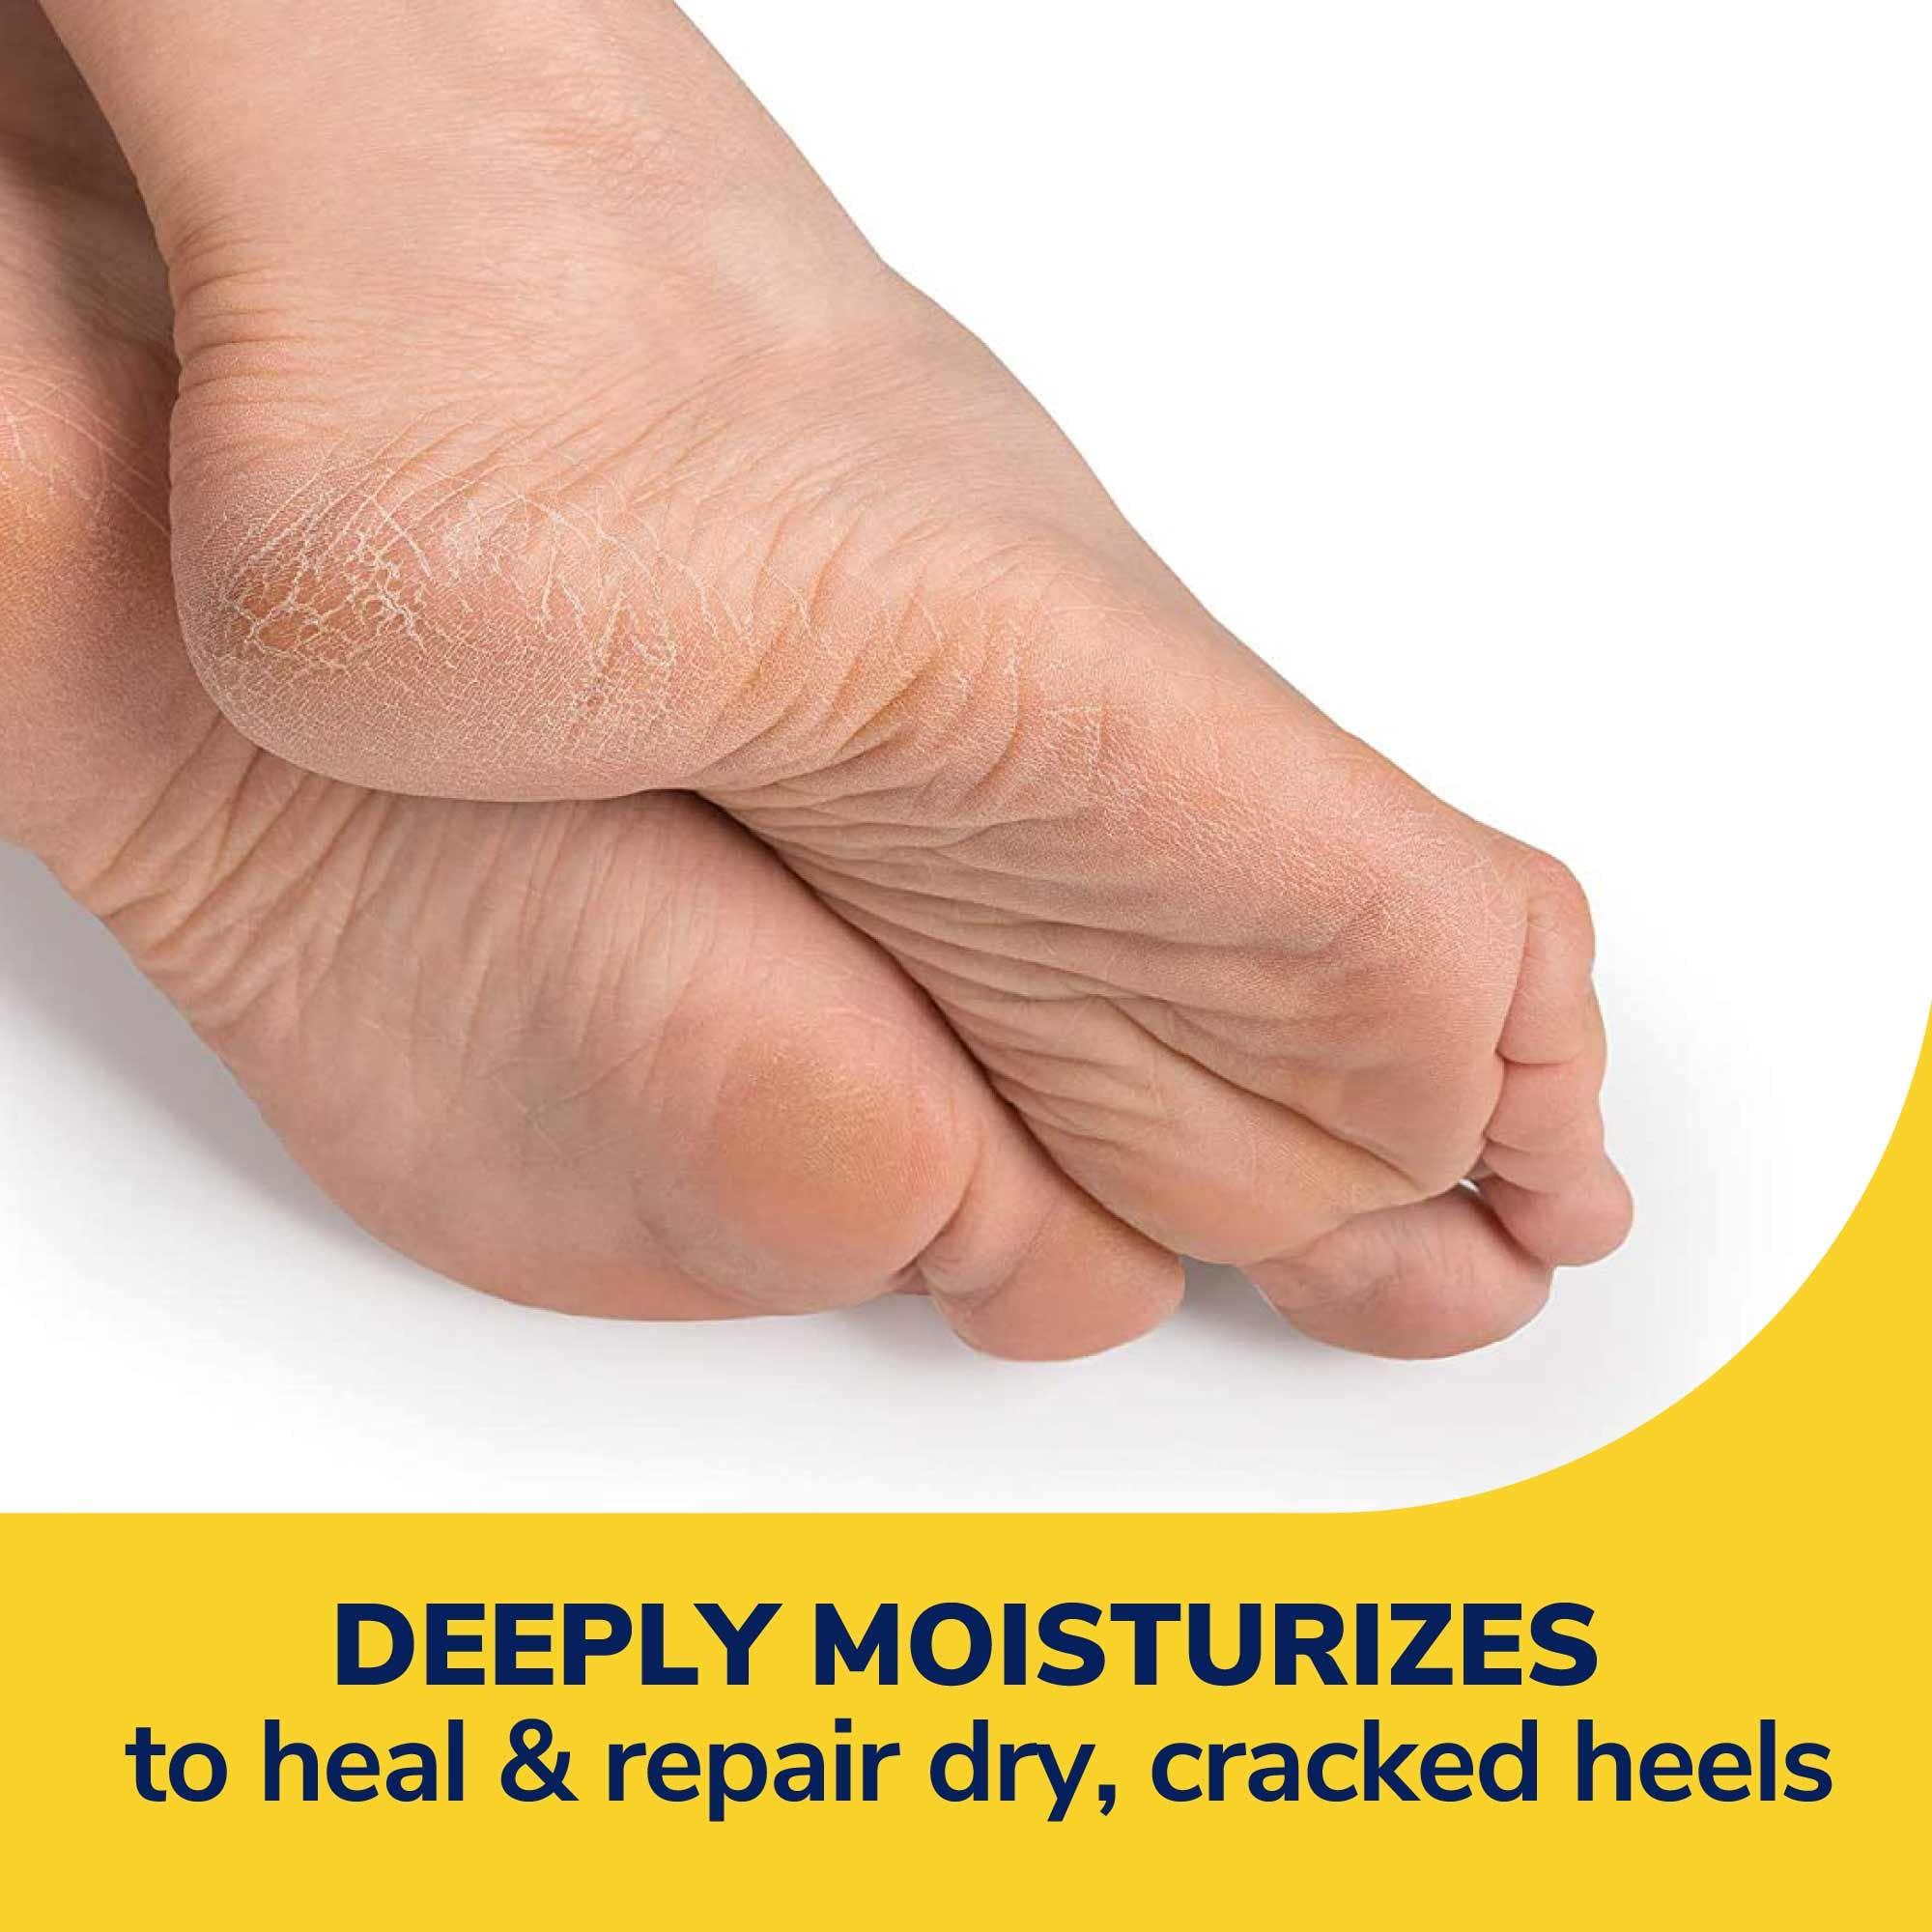 Dr. Scholl’s Severe Cracked Heel Repair Restoring Balm 2.5oz, with 25% Urea for Dry, Cracked Feet, Heals and Moisturizes for Healthy Looking Feet, Foot Care, Epsom Salt Soothes, Safe for Diabetics